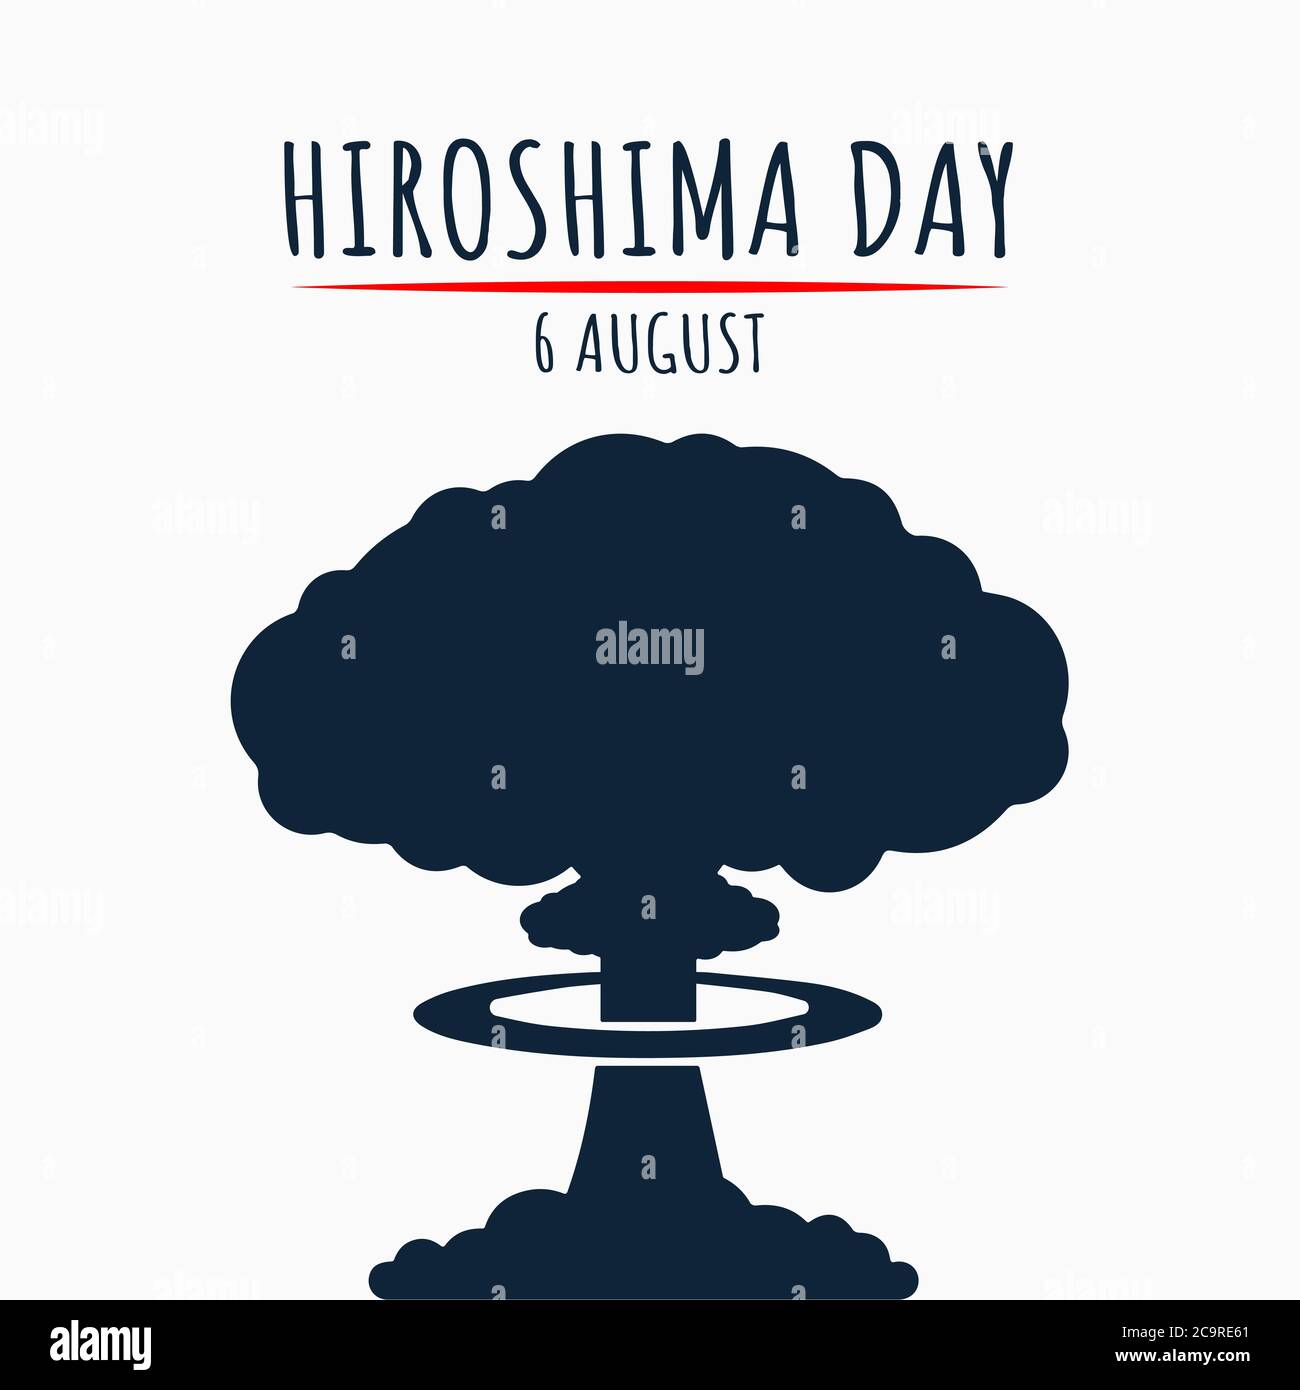 Hiroshima Day, 6 august, nuclear bomb poster, flat illustration, vector Stock Vector